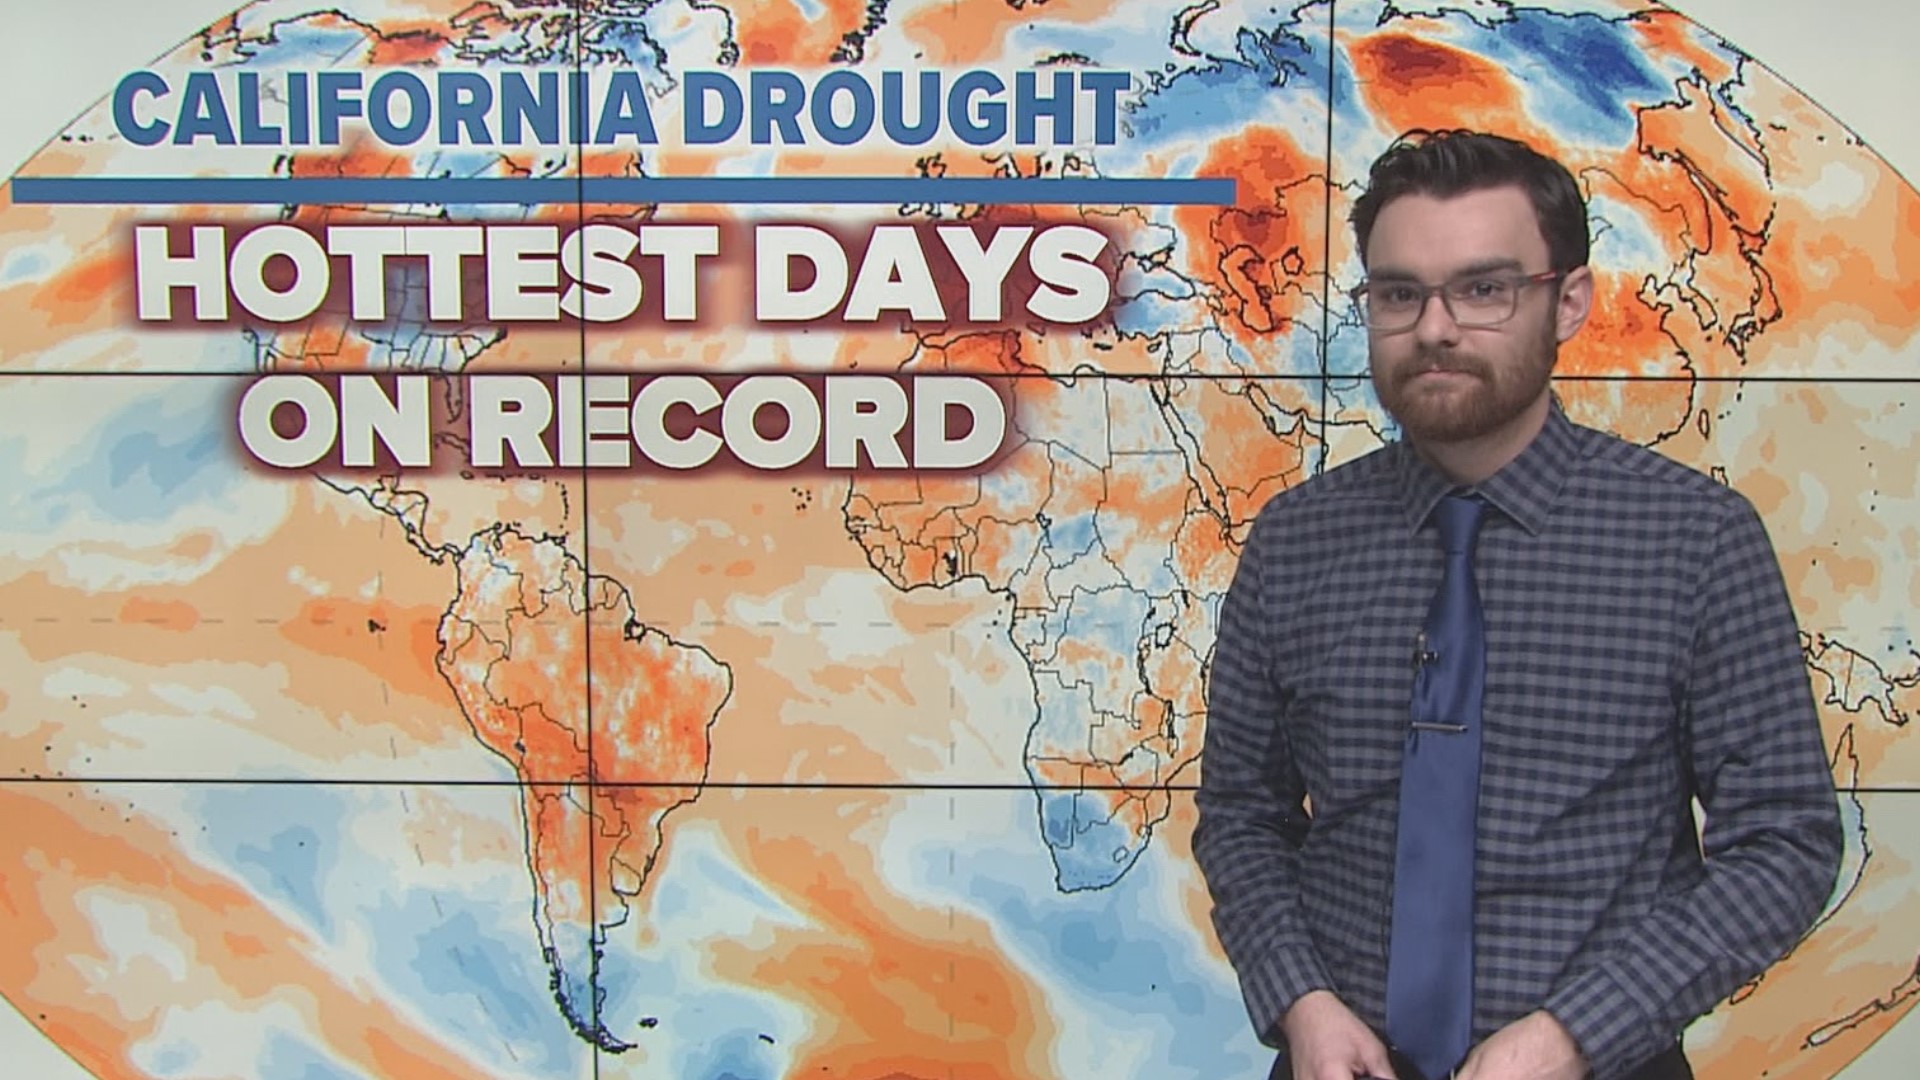 Earth just suffered through days of record setting heat, even though California had a very mild week. ABC10 meteorologist Brenden Mincheff takes a deeper look.